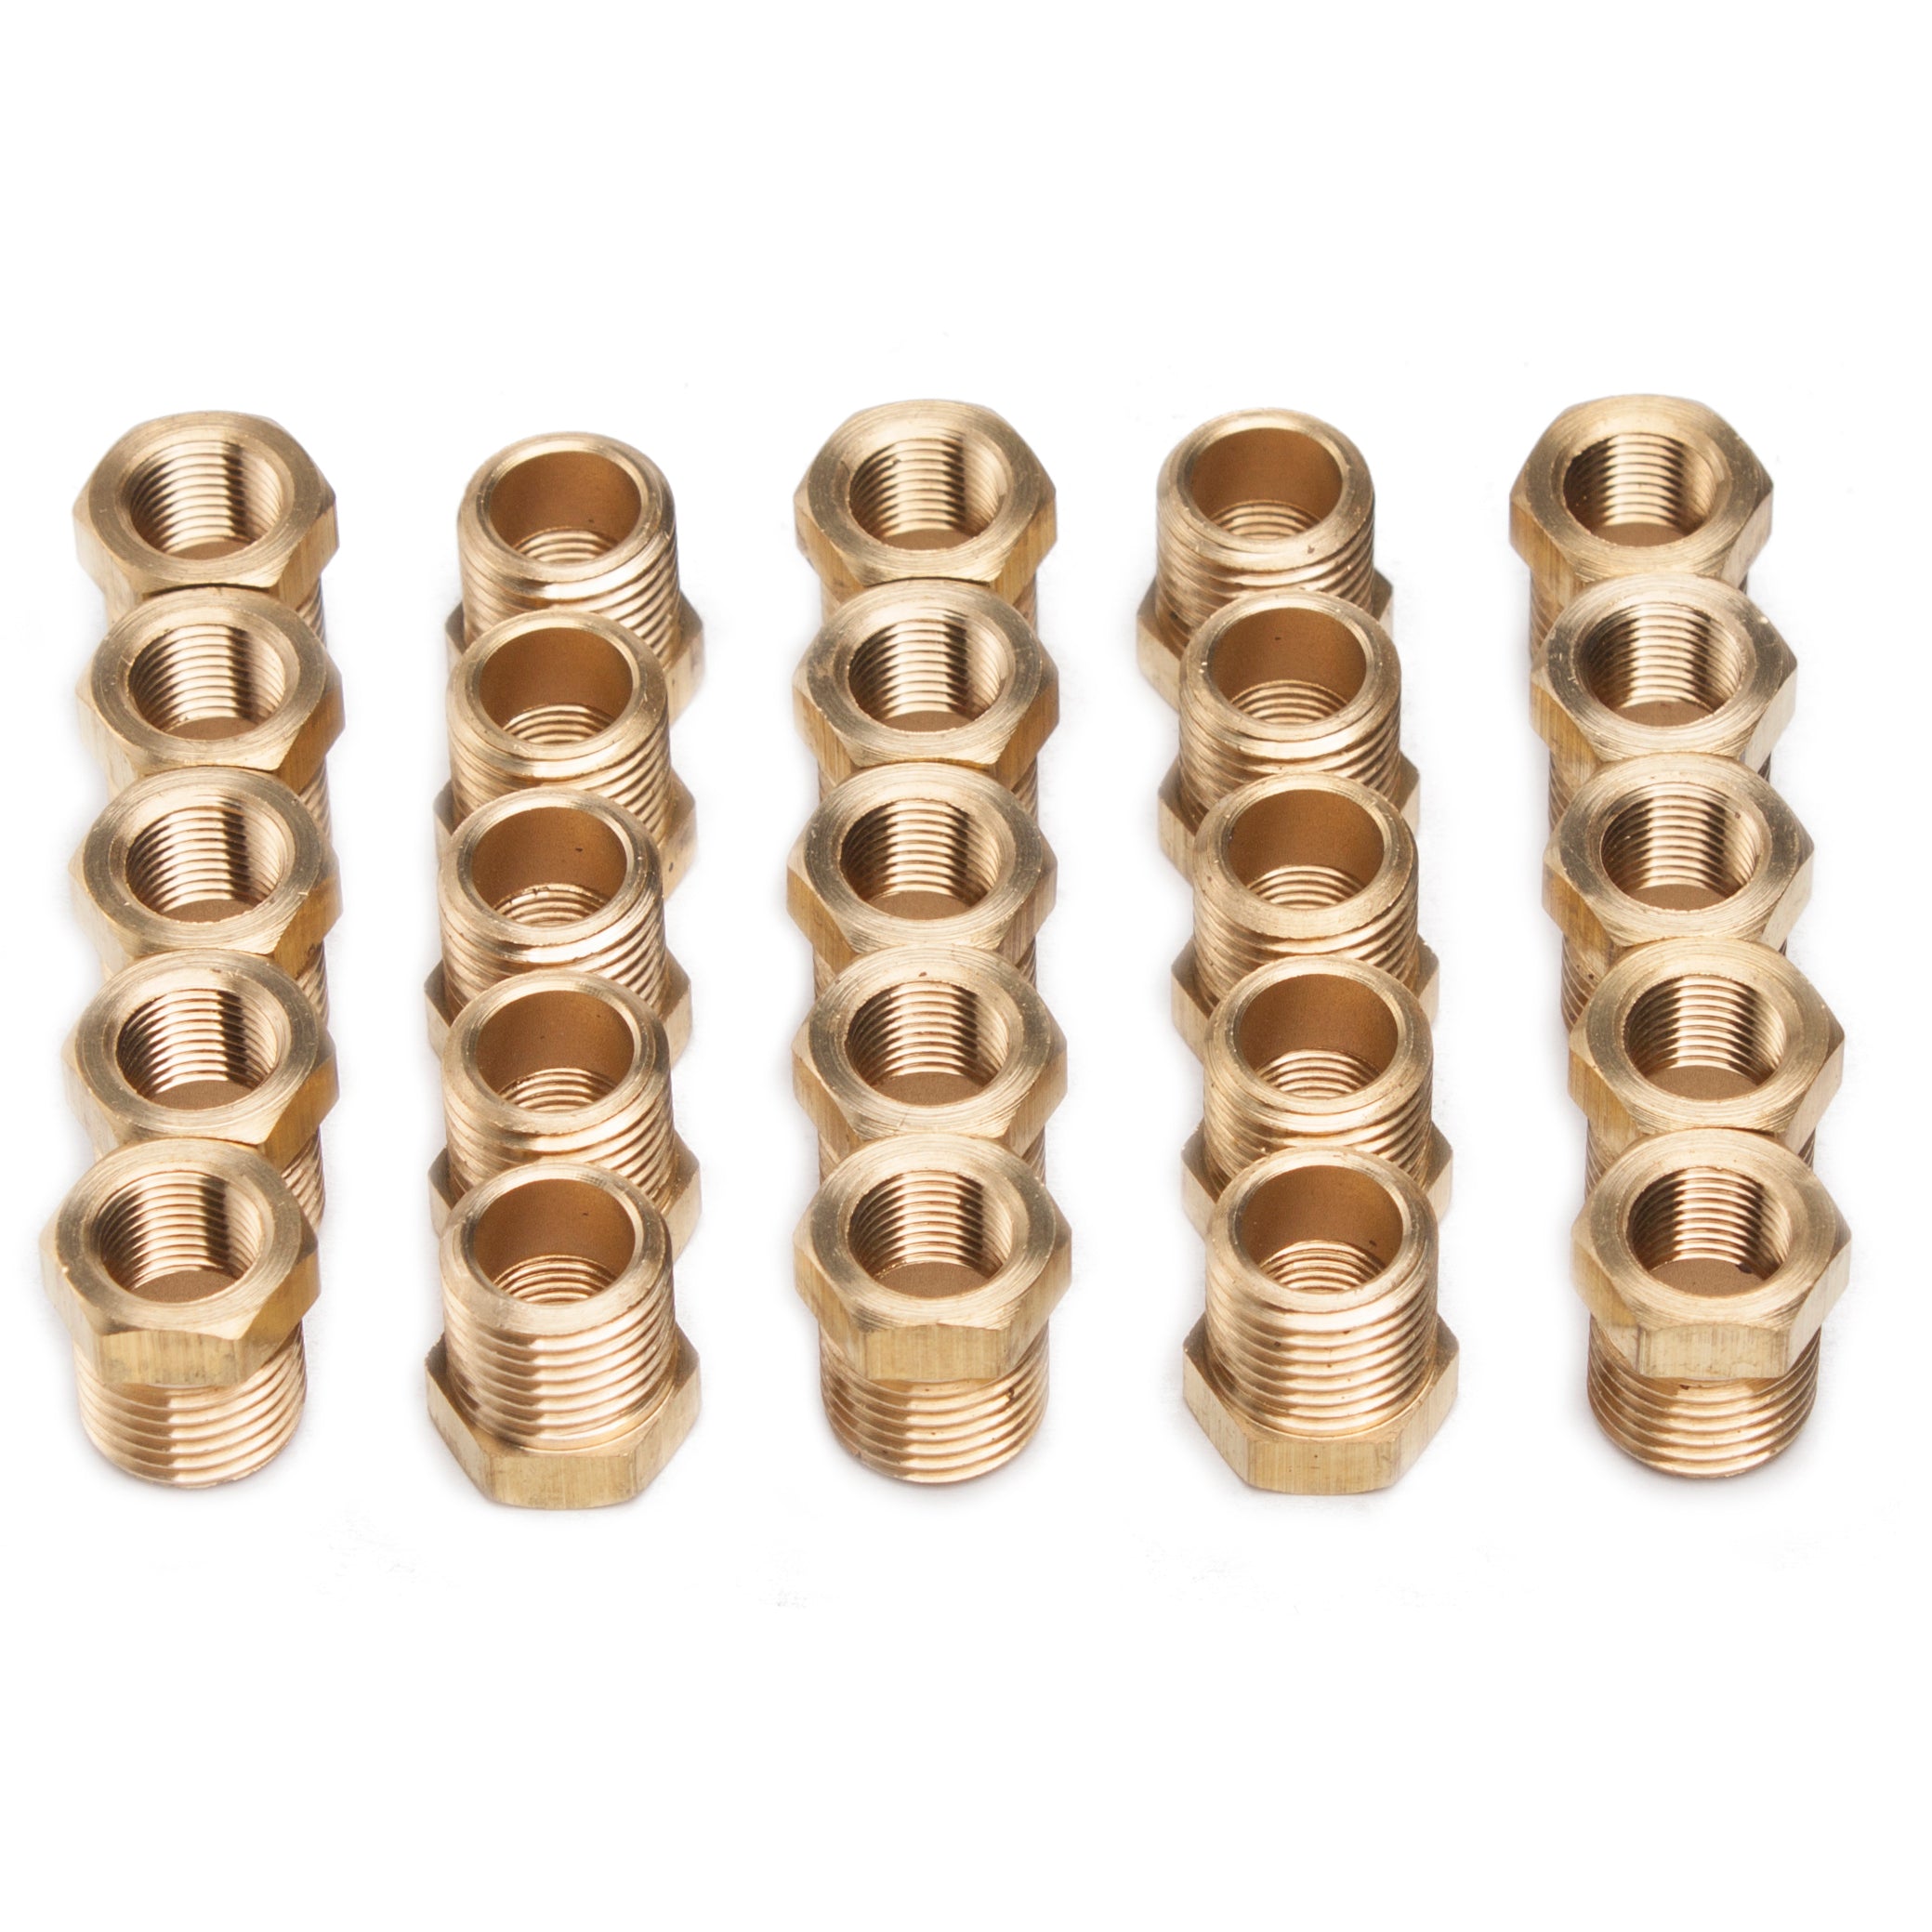 LTWFITTING Brass Hex Pipe Bushing Reducer Fittings 1/4-Inch Male BSPT x 1/8-Inch Female BSPP (Pack of 25)